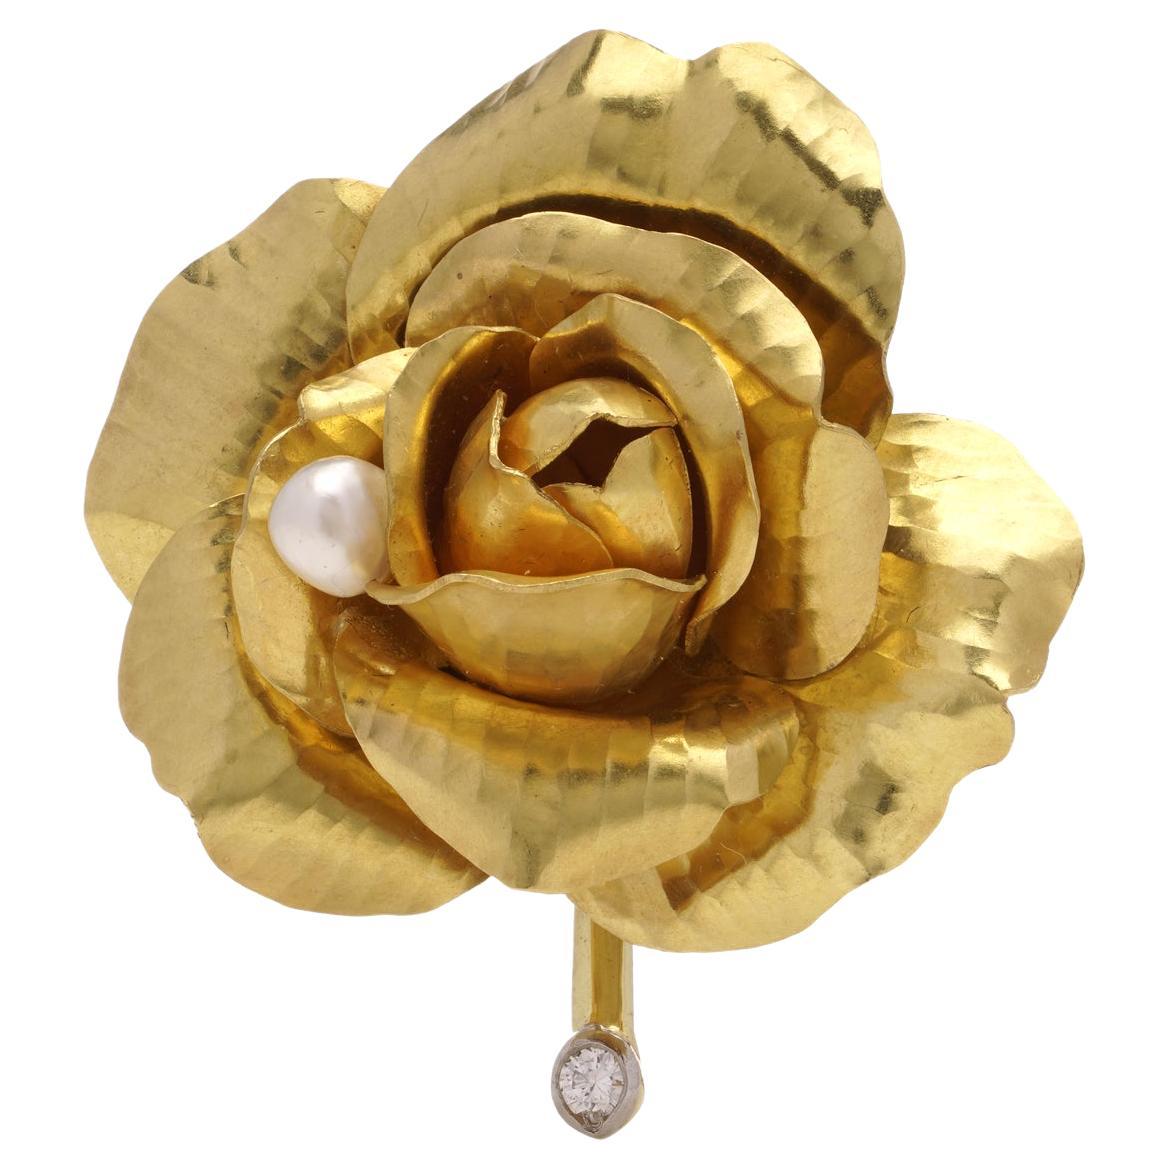 Cartier Flower Diamond and Pearl Brooch in 18kt Gold